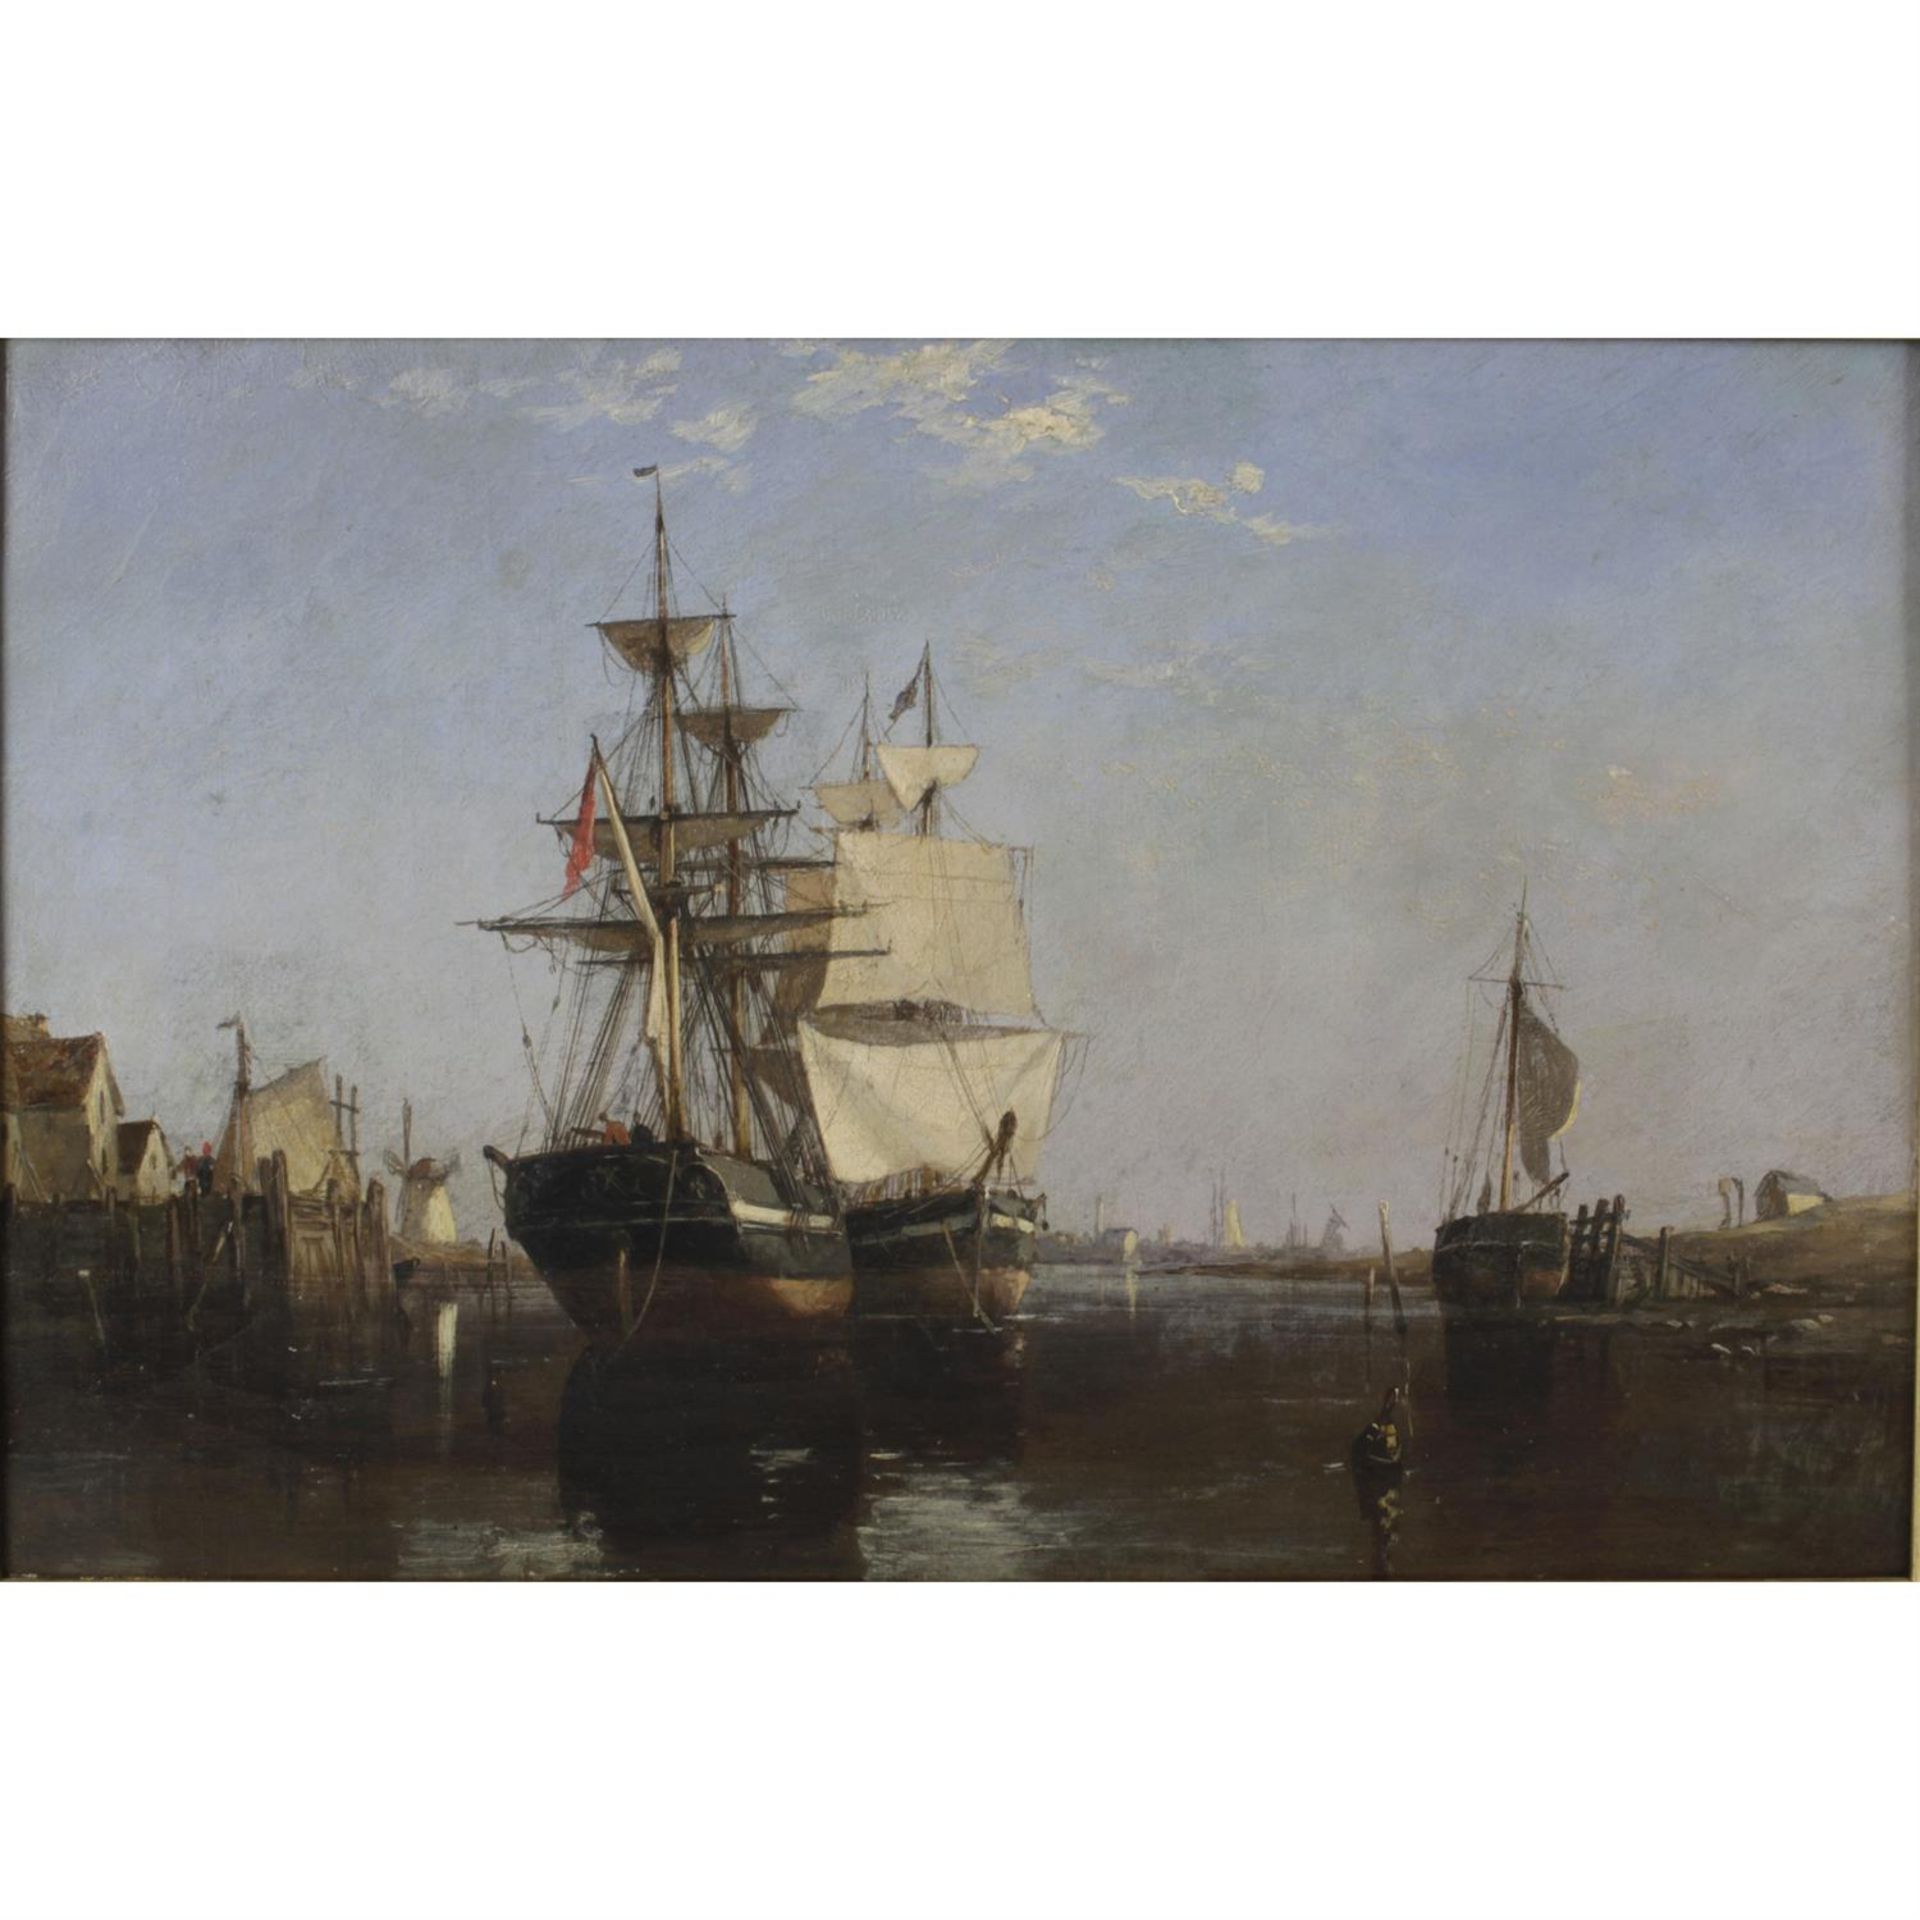 R. H Nibbs (1841 - 1889), river scene with sailing vessels